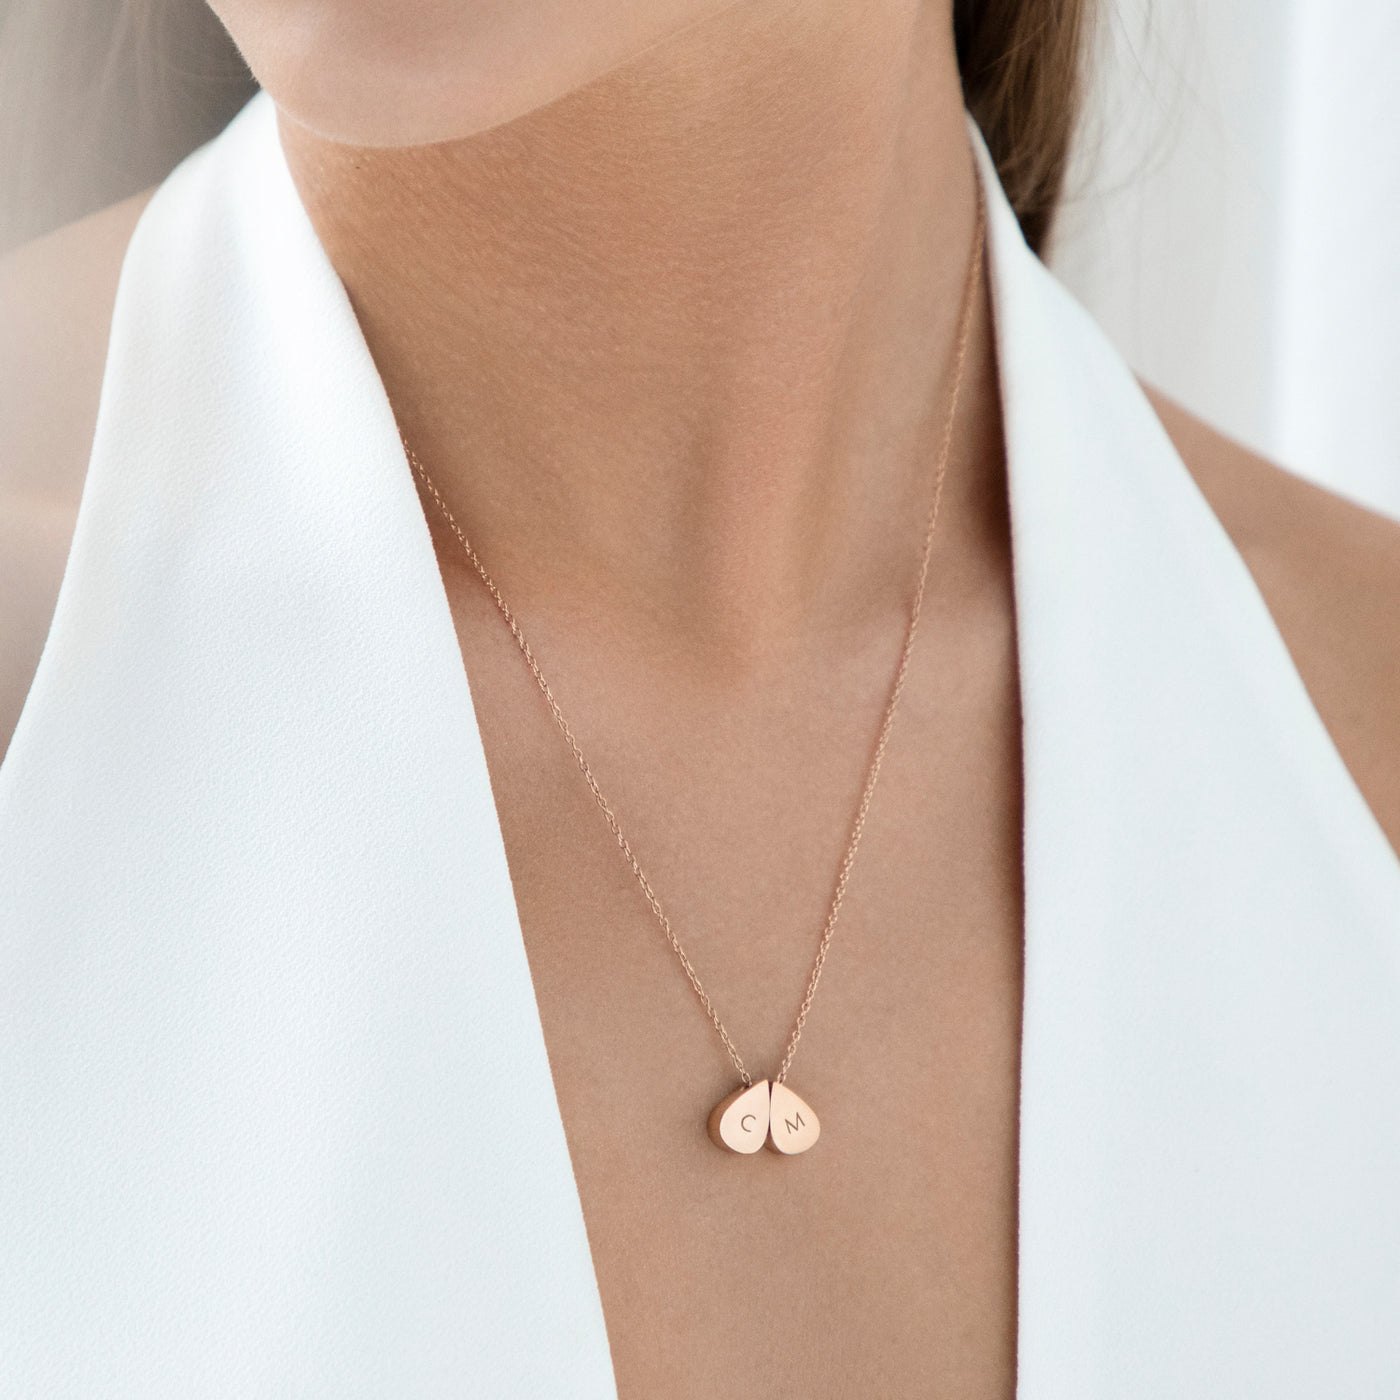 Teardrop Double Bead Necklace in Rose Gold